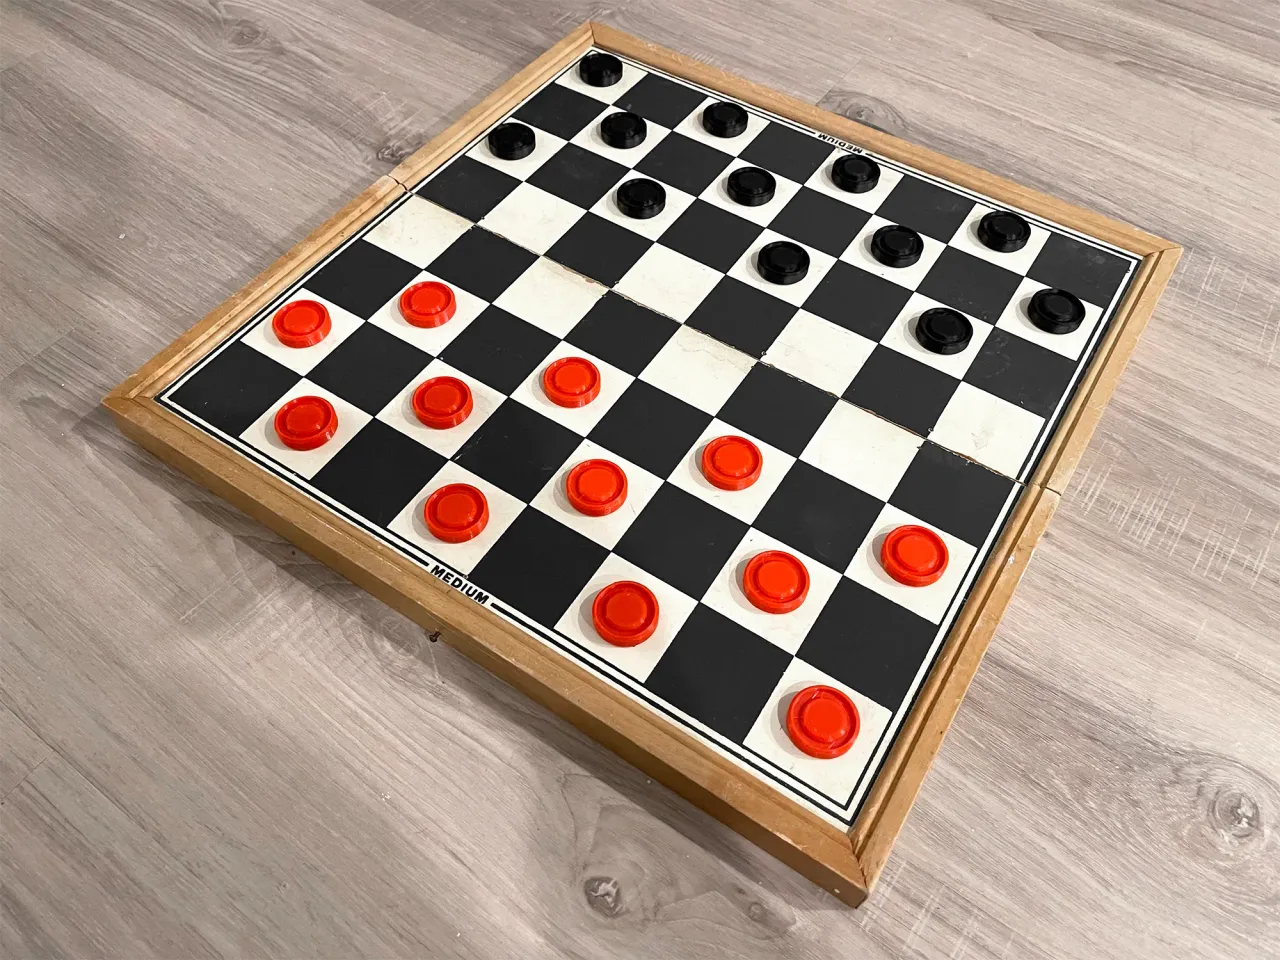 Download Easy Checkers